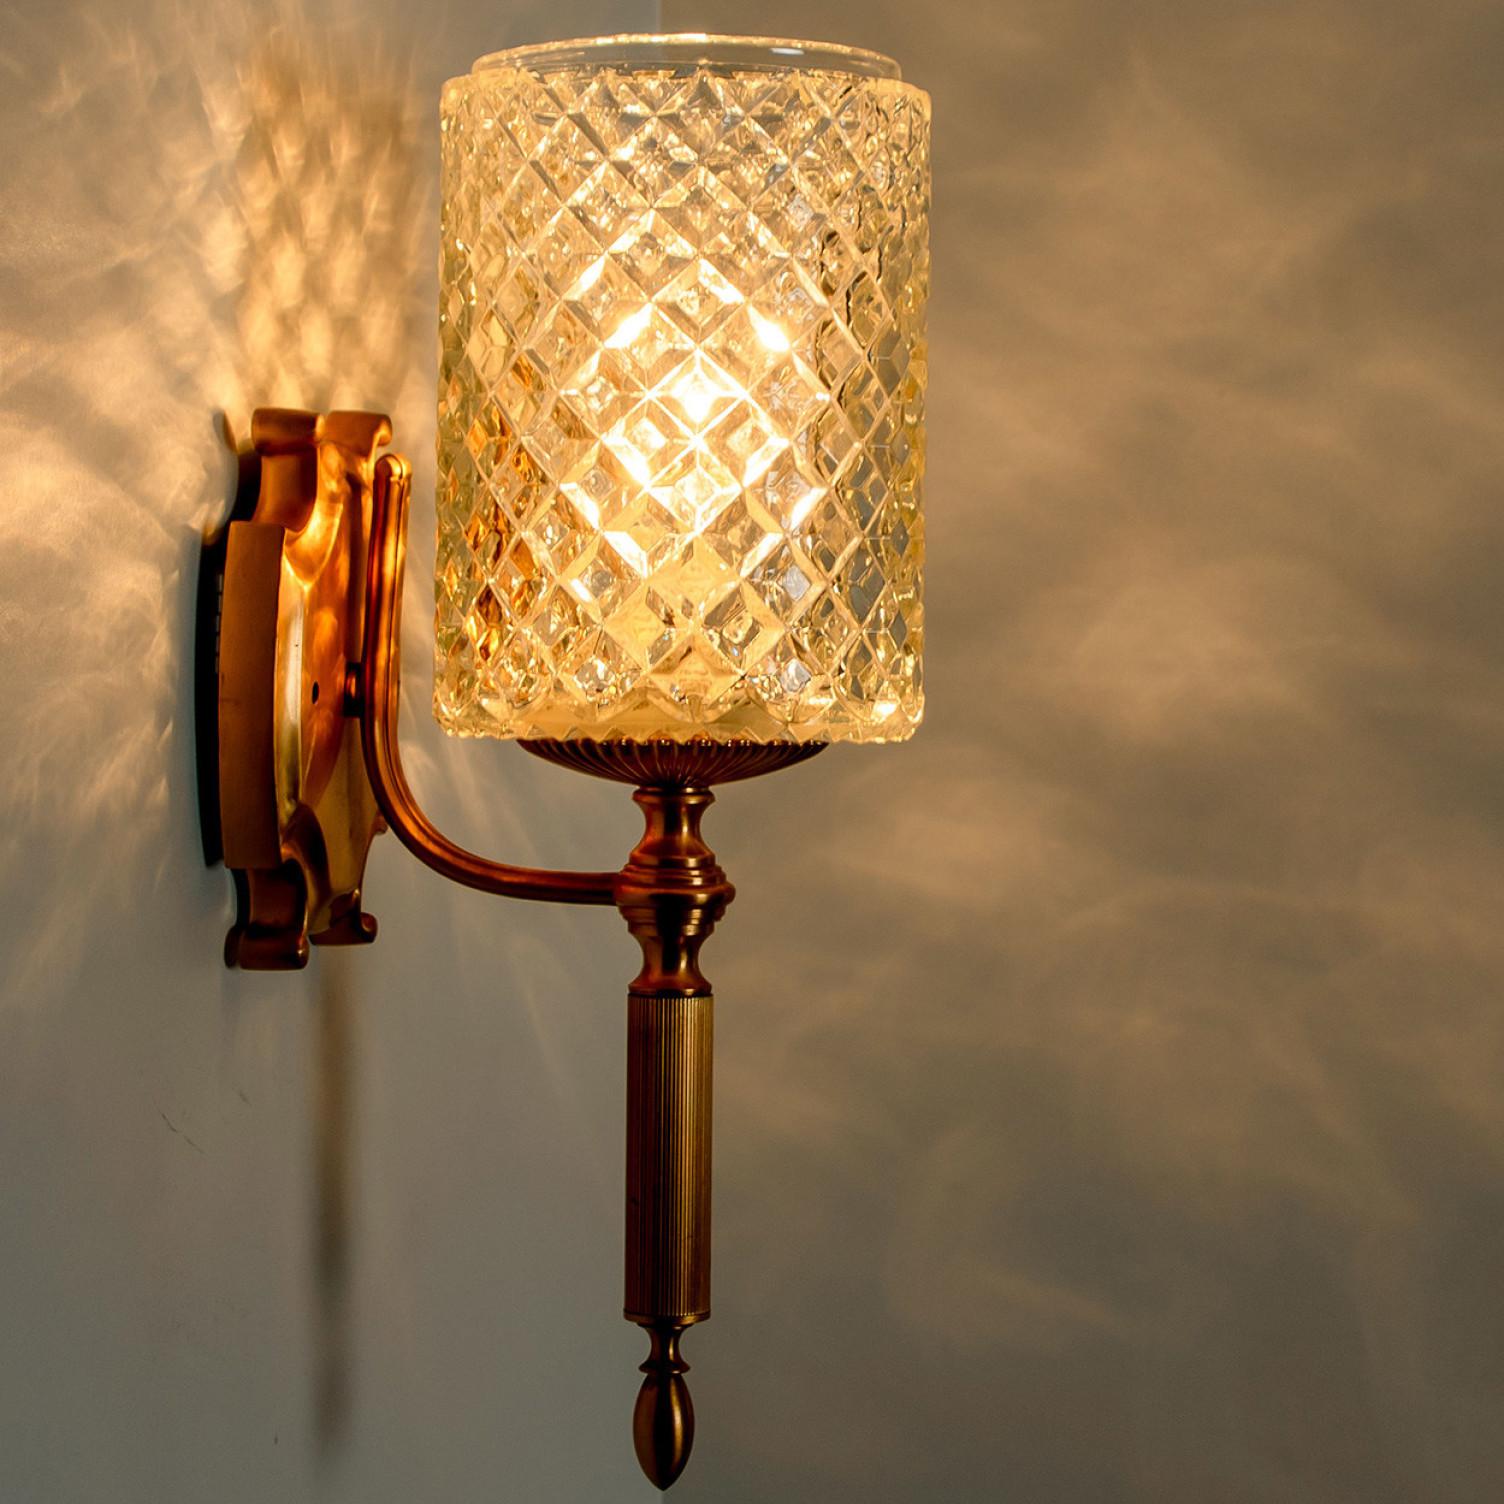 20th Century Textured Glass and Brass Wall Lights, Germany, 1960s For Sale